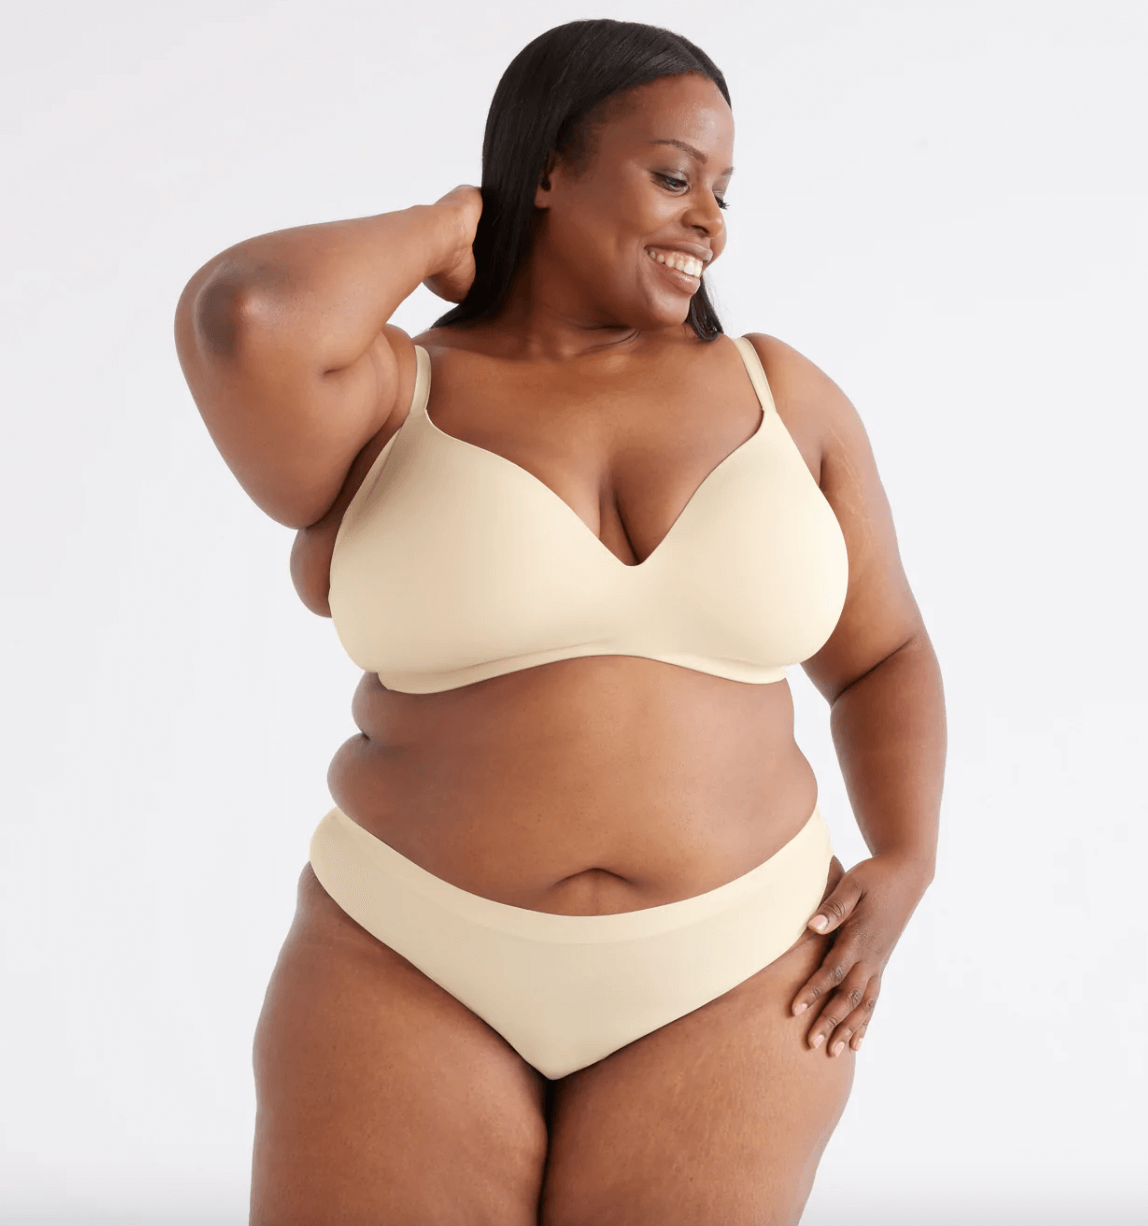 Plus Size Bras for Very Large Breast